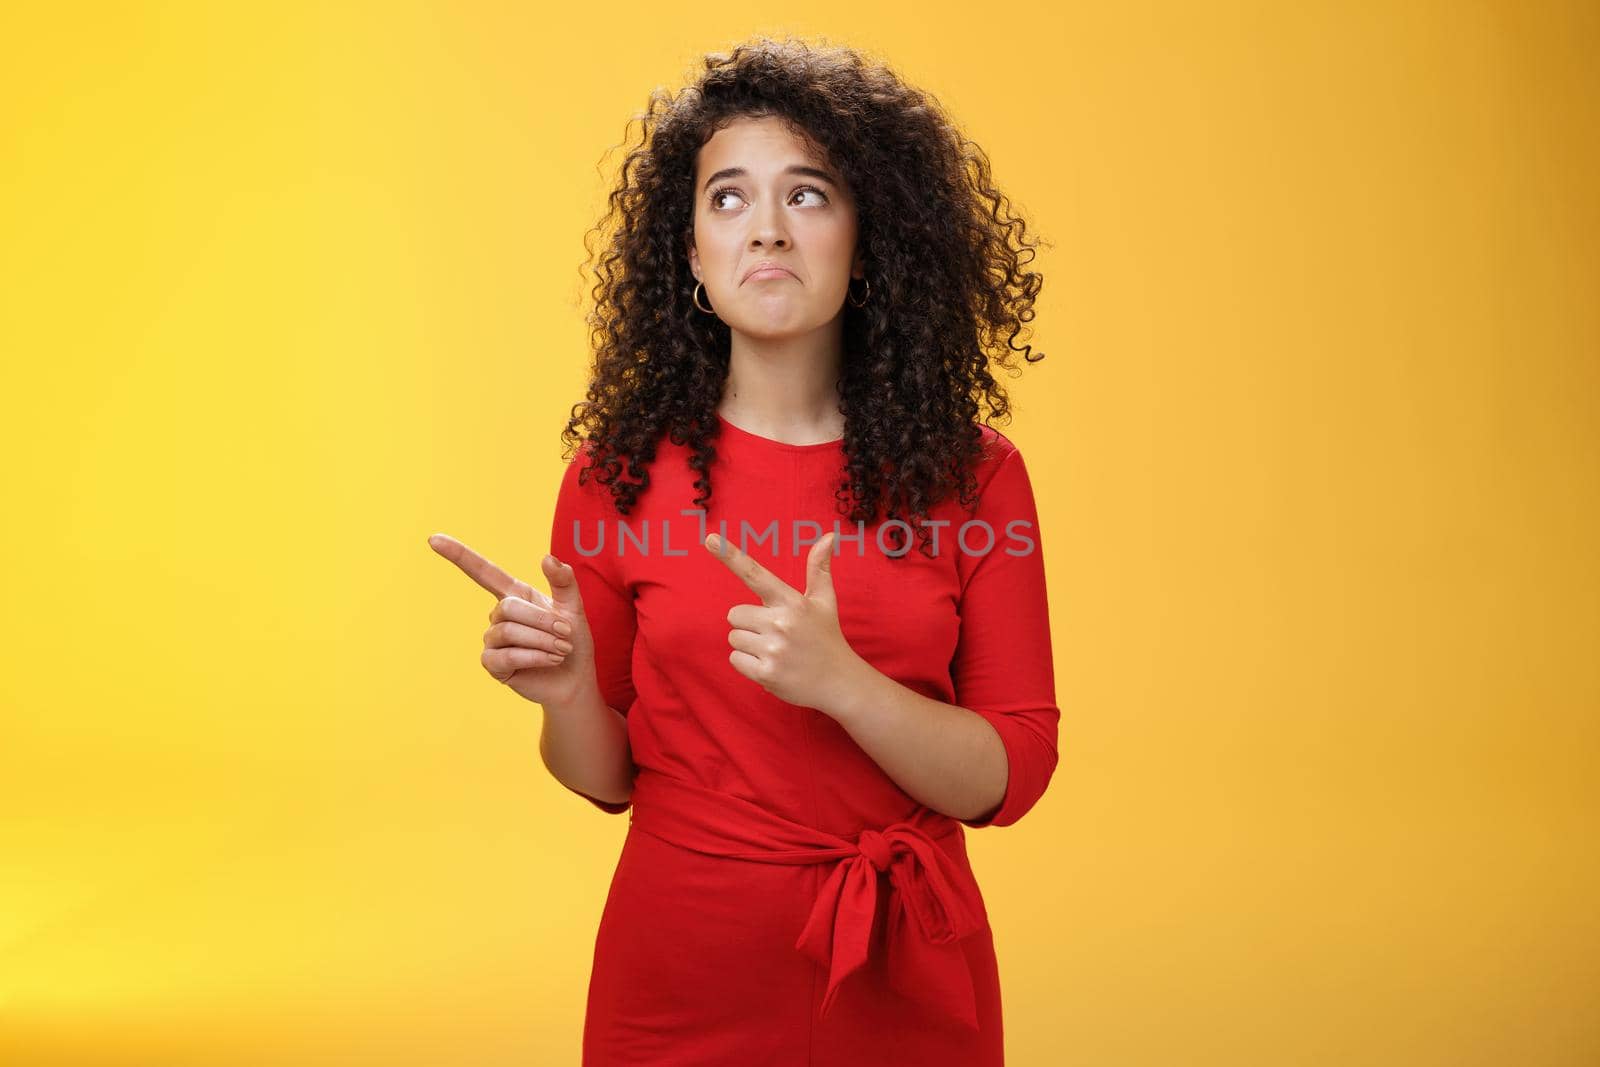 Gloomy upset and sad cute silly curly-haired girl in red dress pursing lips down in unhappy smile frowning from regret, missing chance or offer pointing at upper left corner over yellow background.